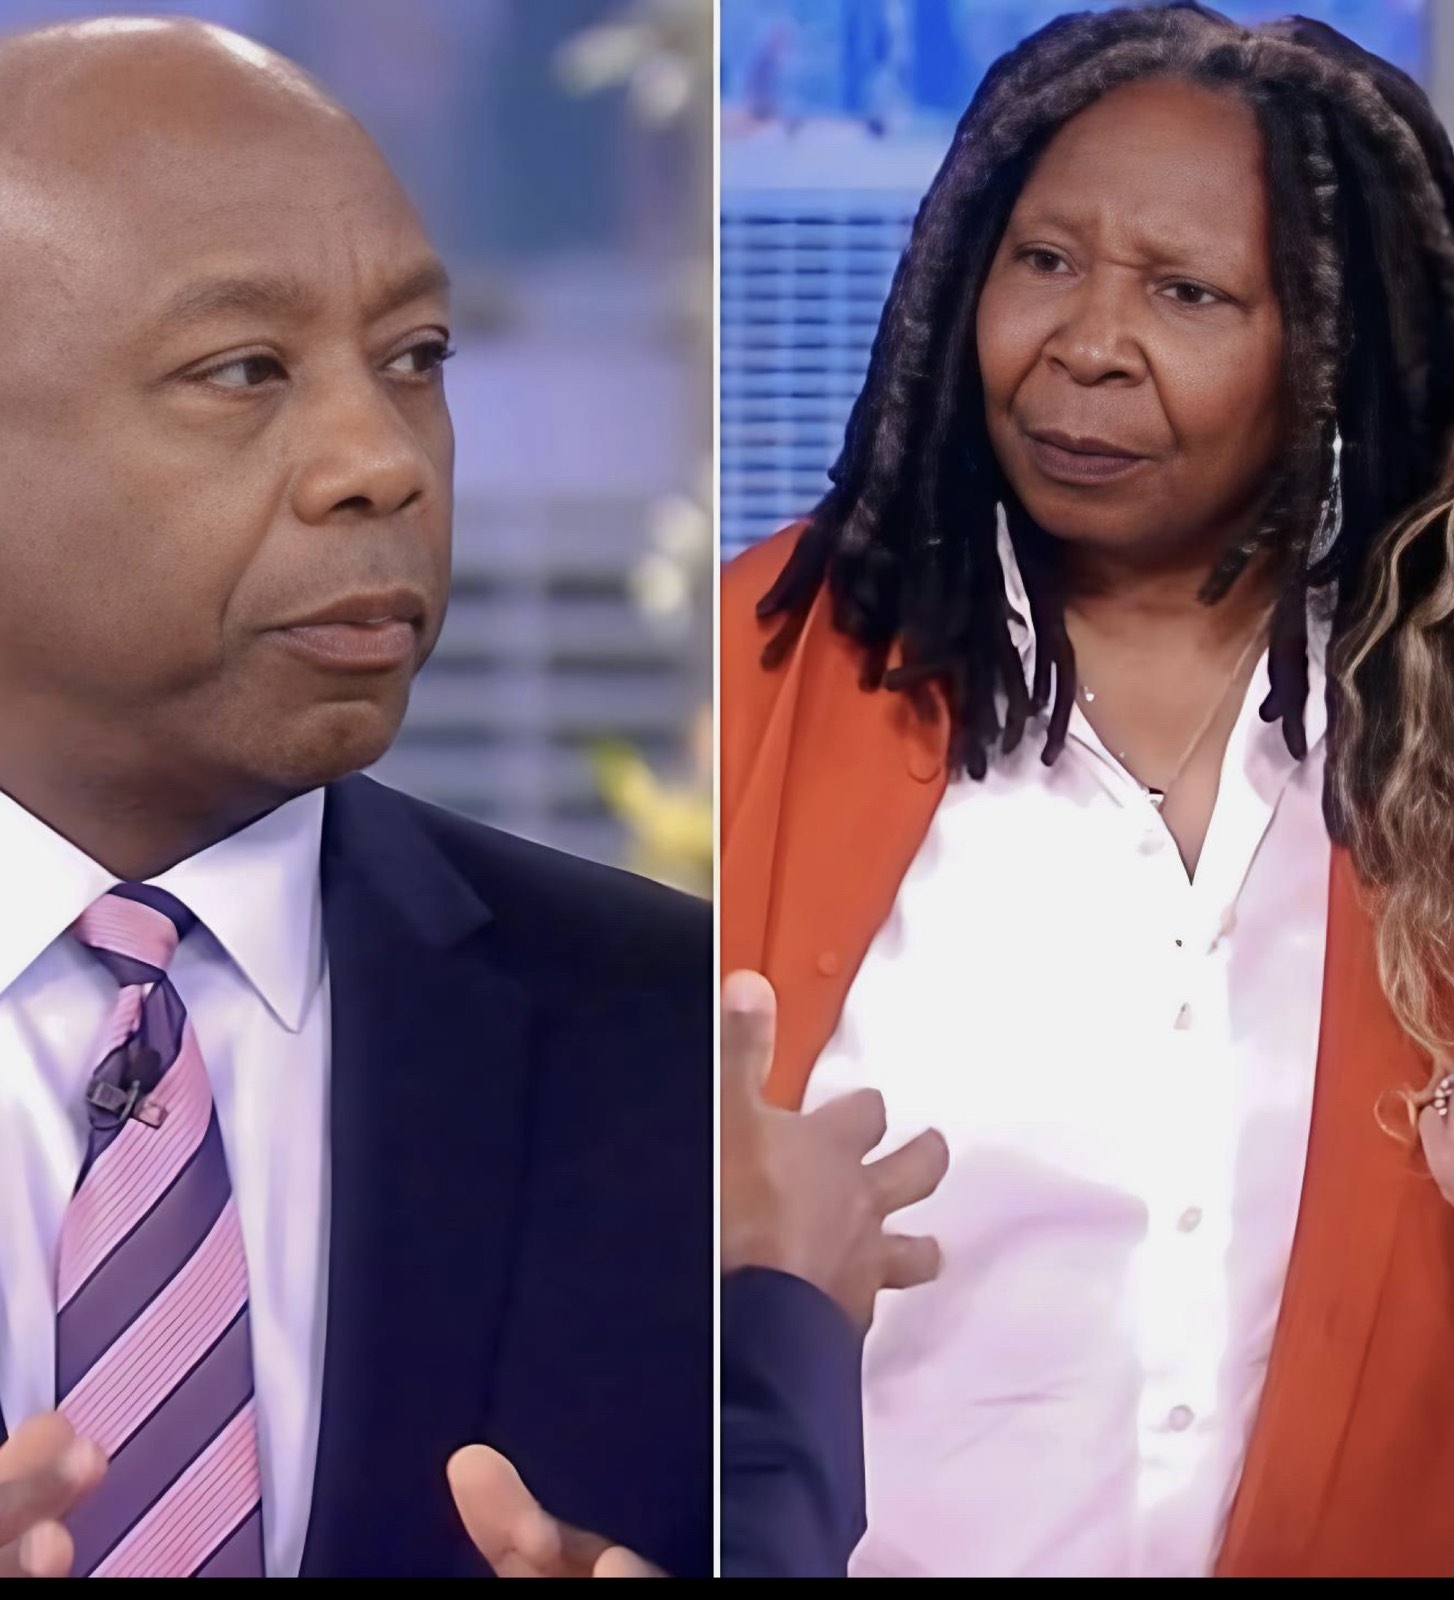 “Emotionally Charged Moment: Whoopi Goldberg Walks Out in Tears After Heated Exchange with Tim Scott on ‘The View'”.